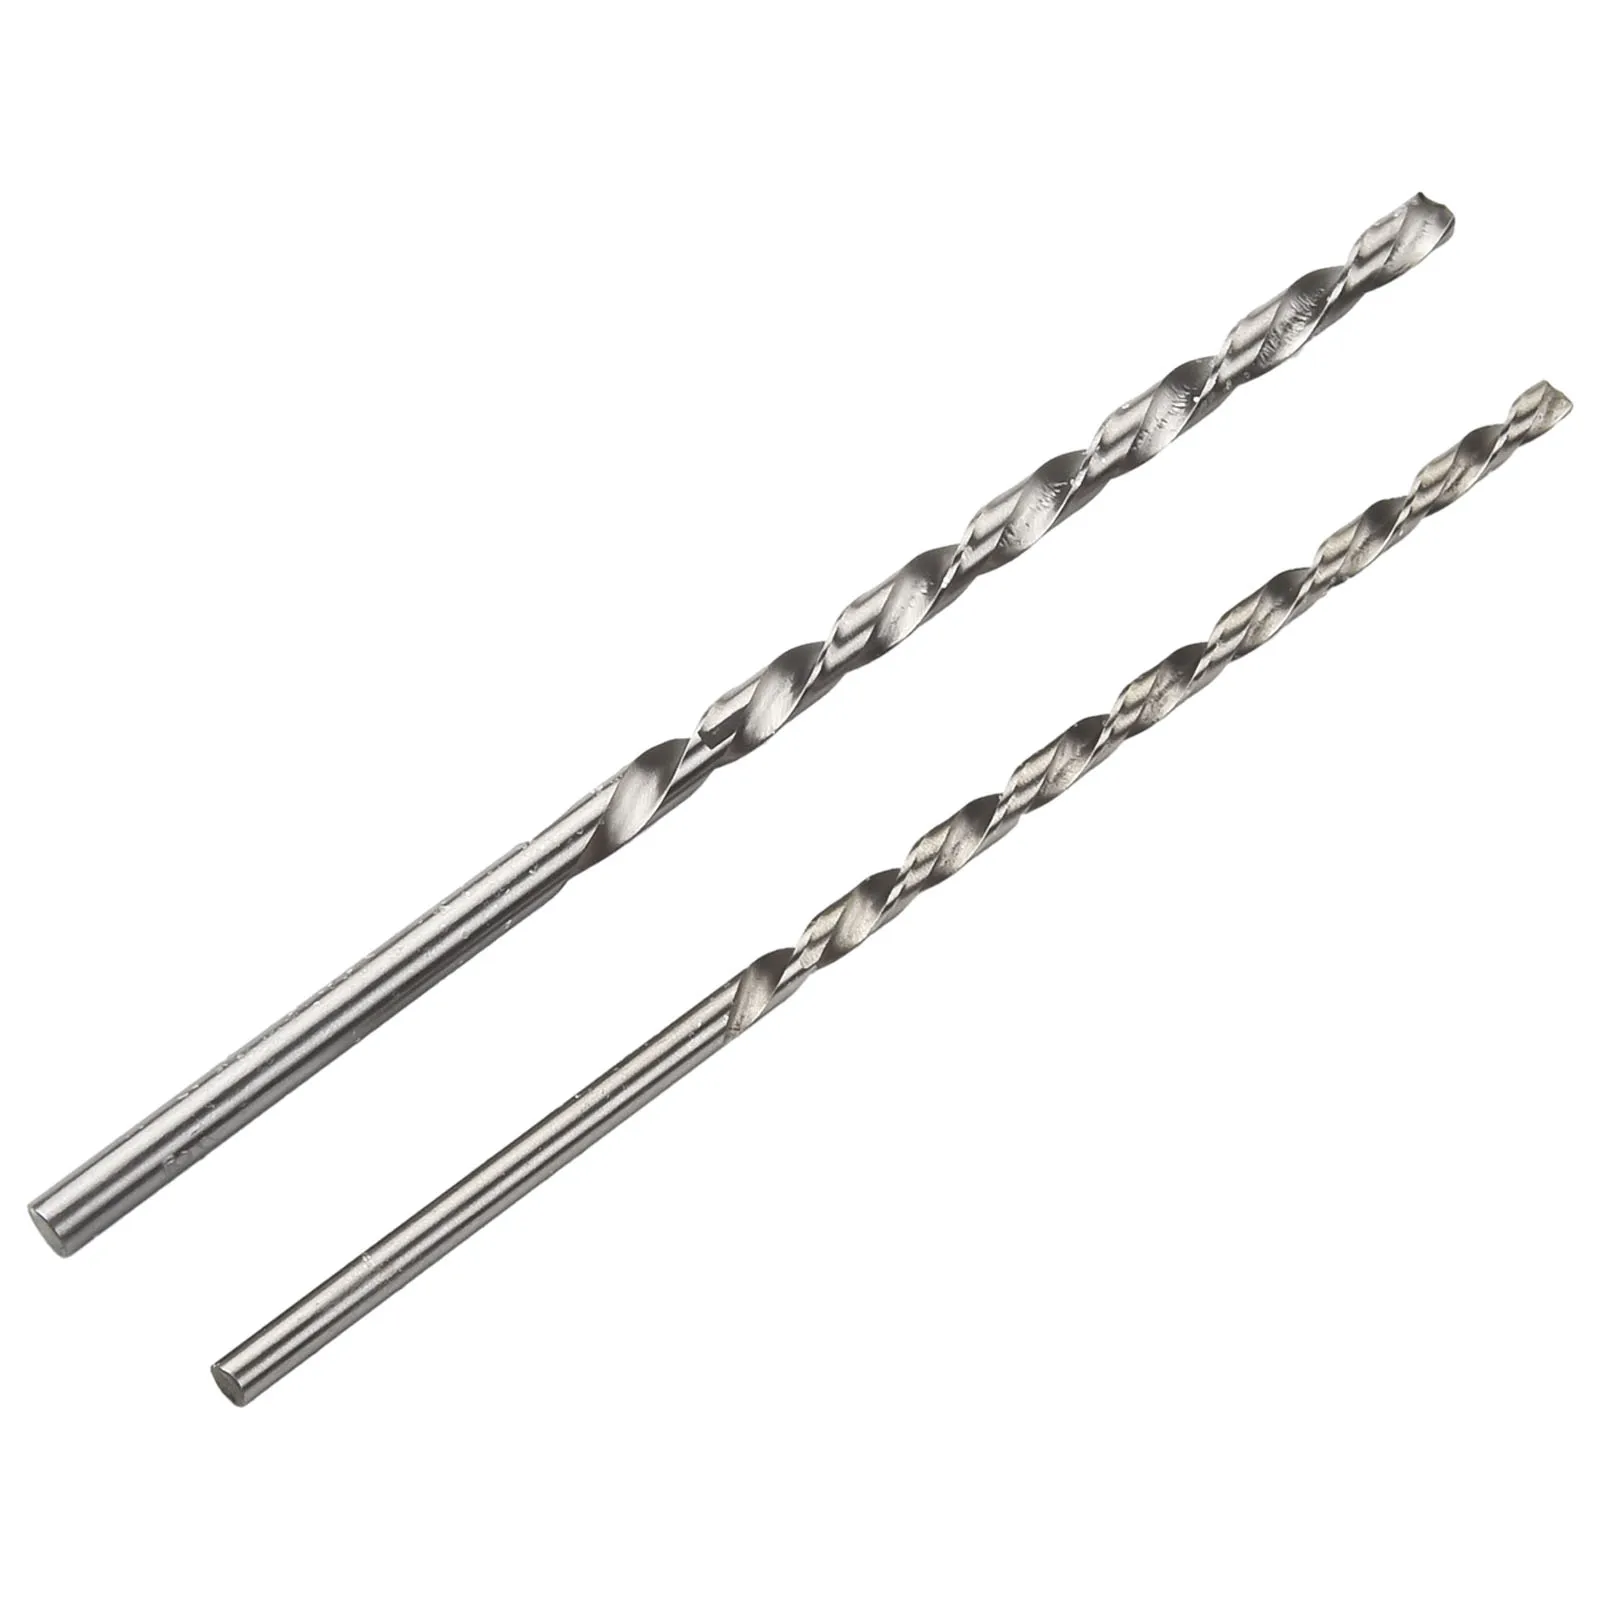 Drilling Machines Drill Bit Electric Drill 5mm Accessories Extra Long High Speed Steel Parts Silver 10PCS 3.5mm